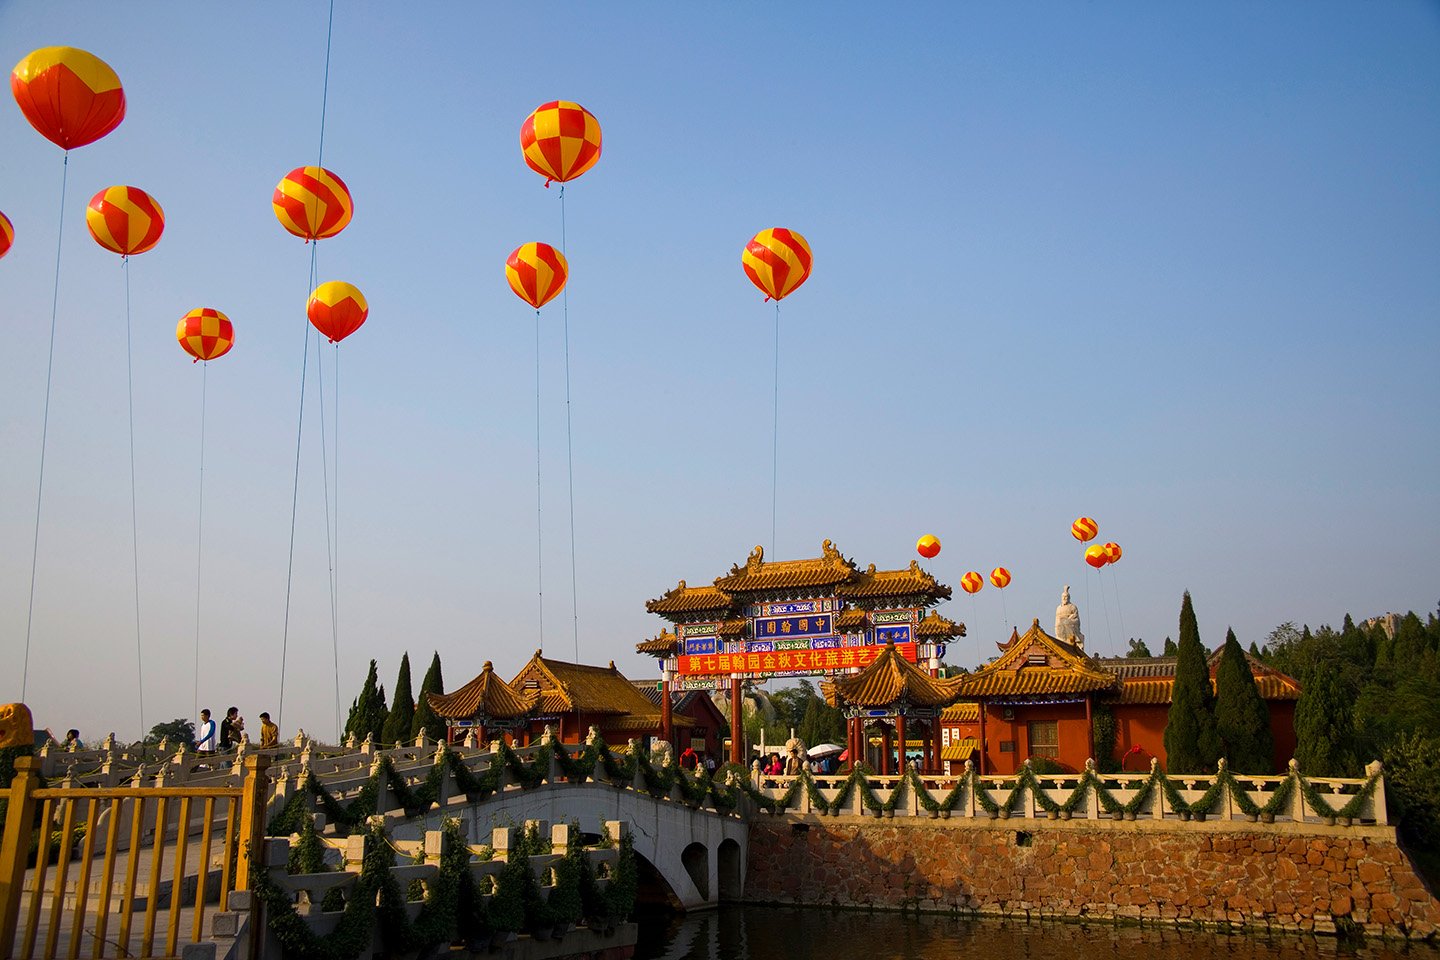 A coulourful and tradional architecture structure with yellow and red ballons floating above against a deep blue sky, in Henan province, China 